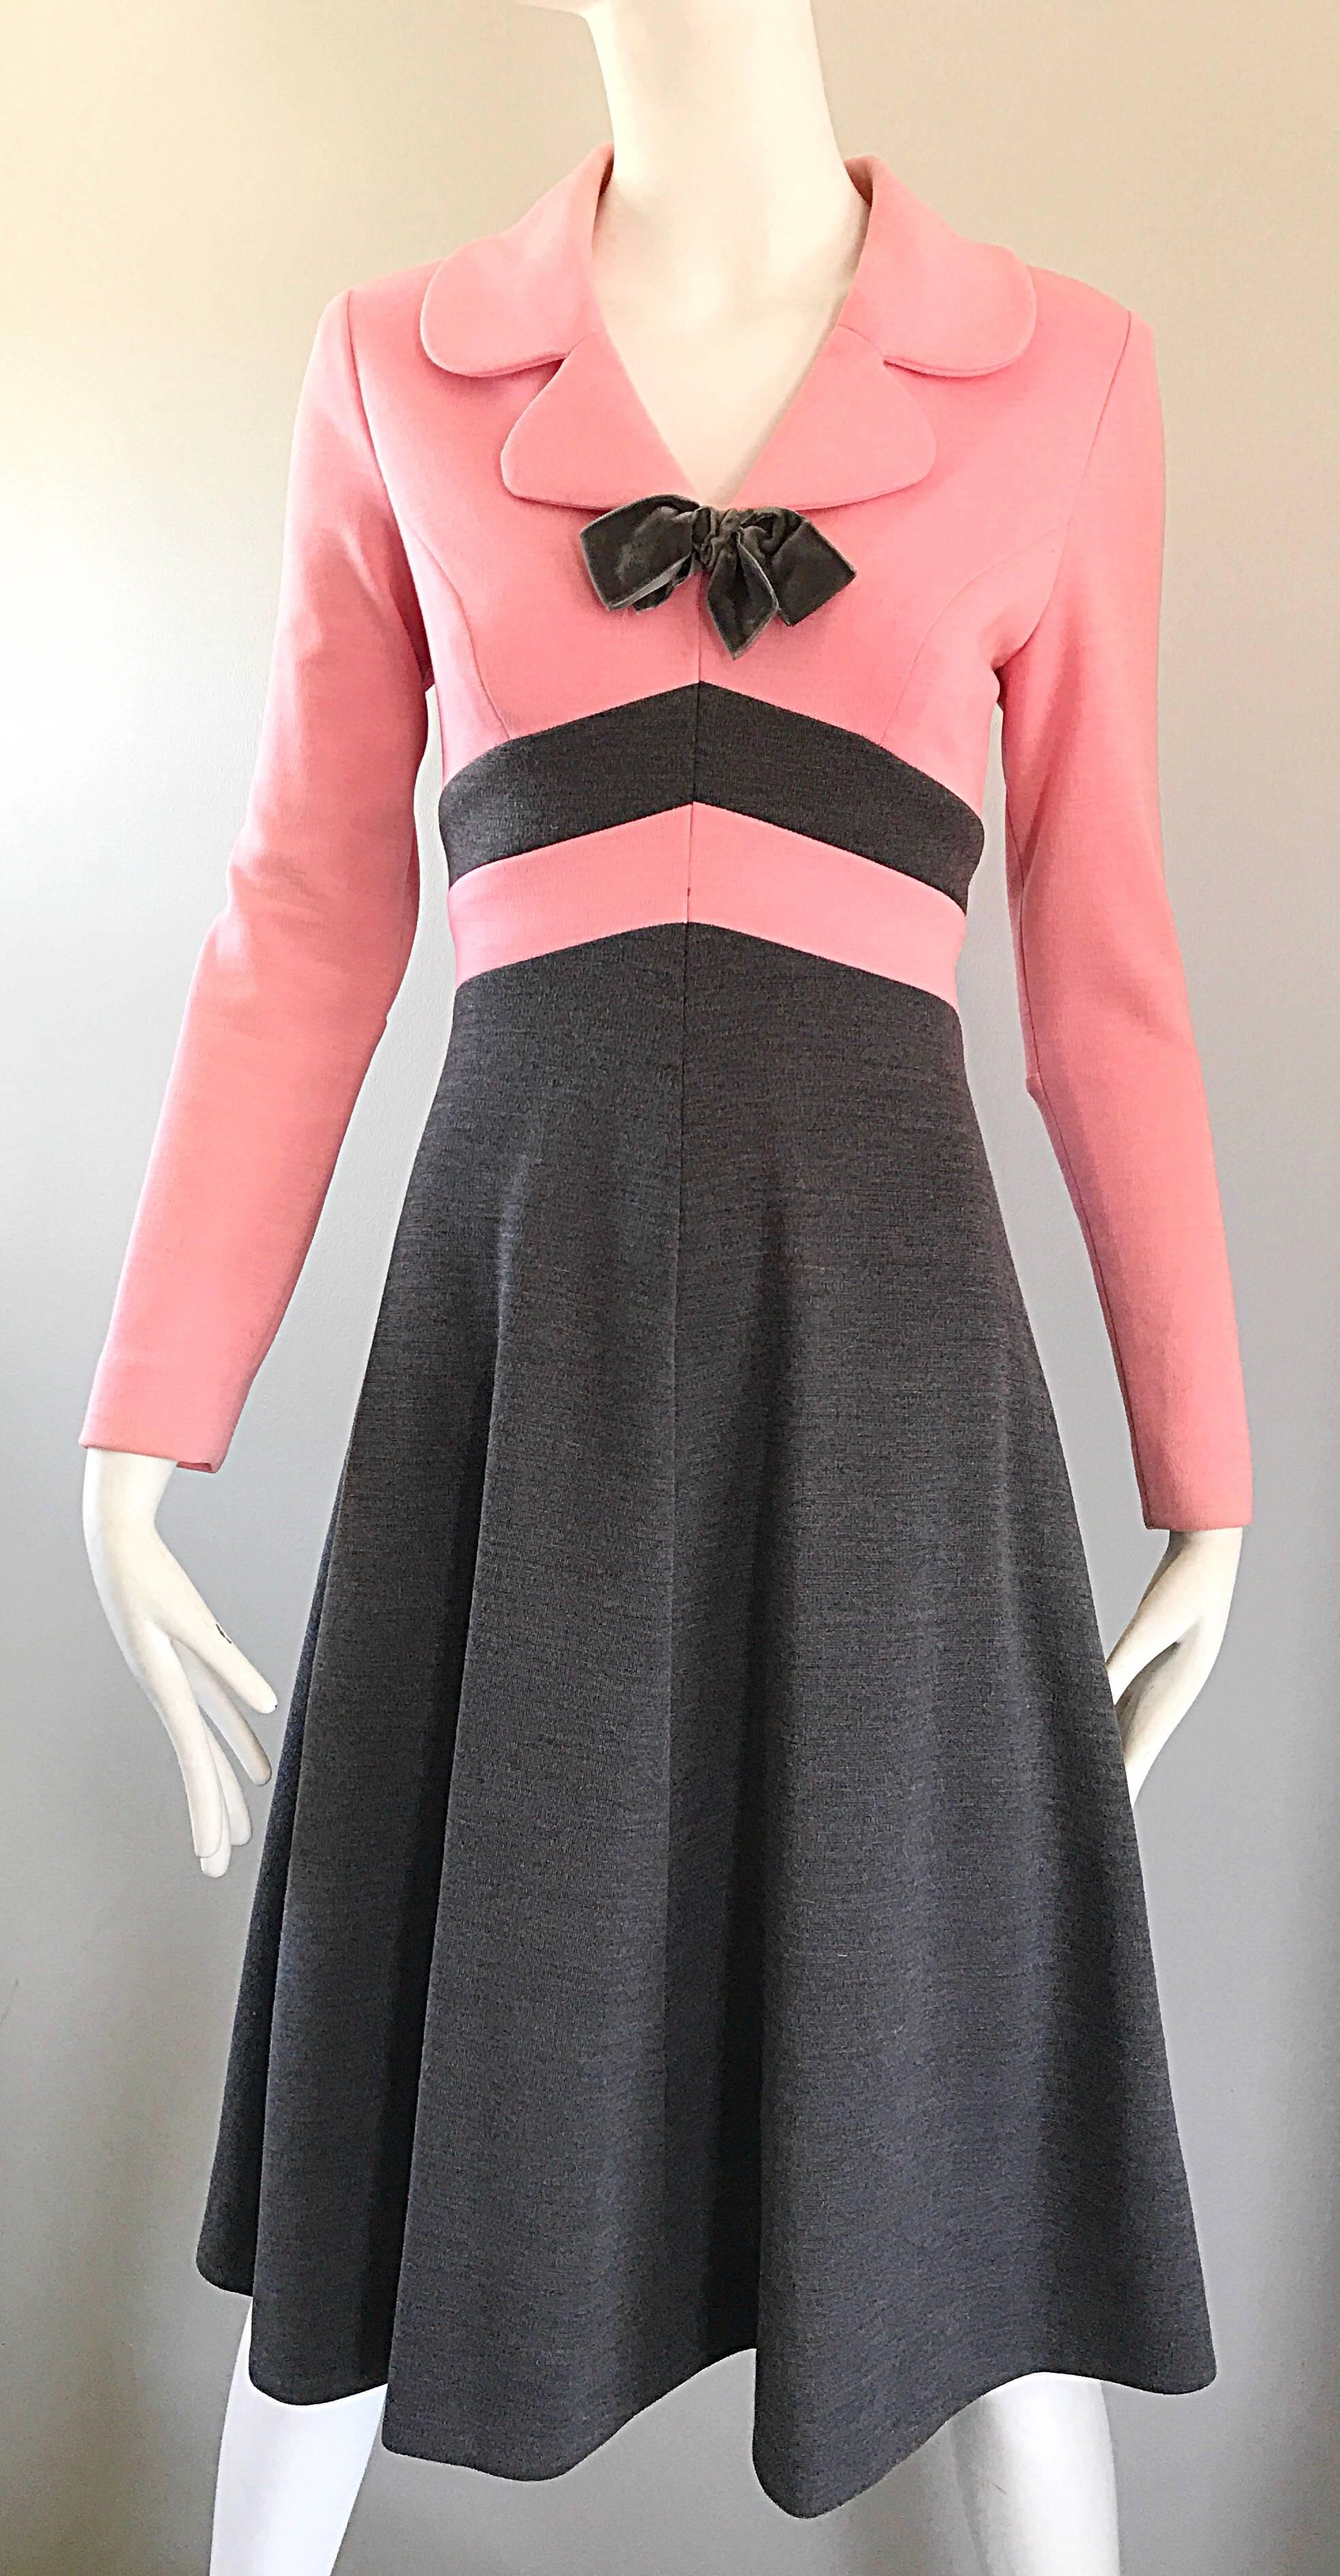 Women's 1960s Bubblegum Pink and Charcoal Gray Long Sleeve Vintage 60s Knit A Line Dress